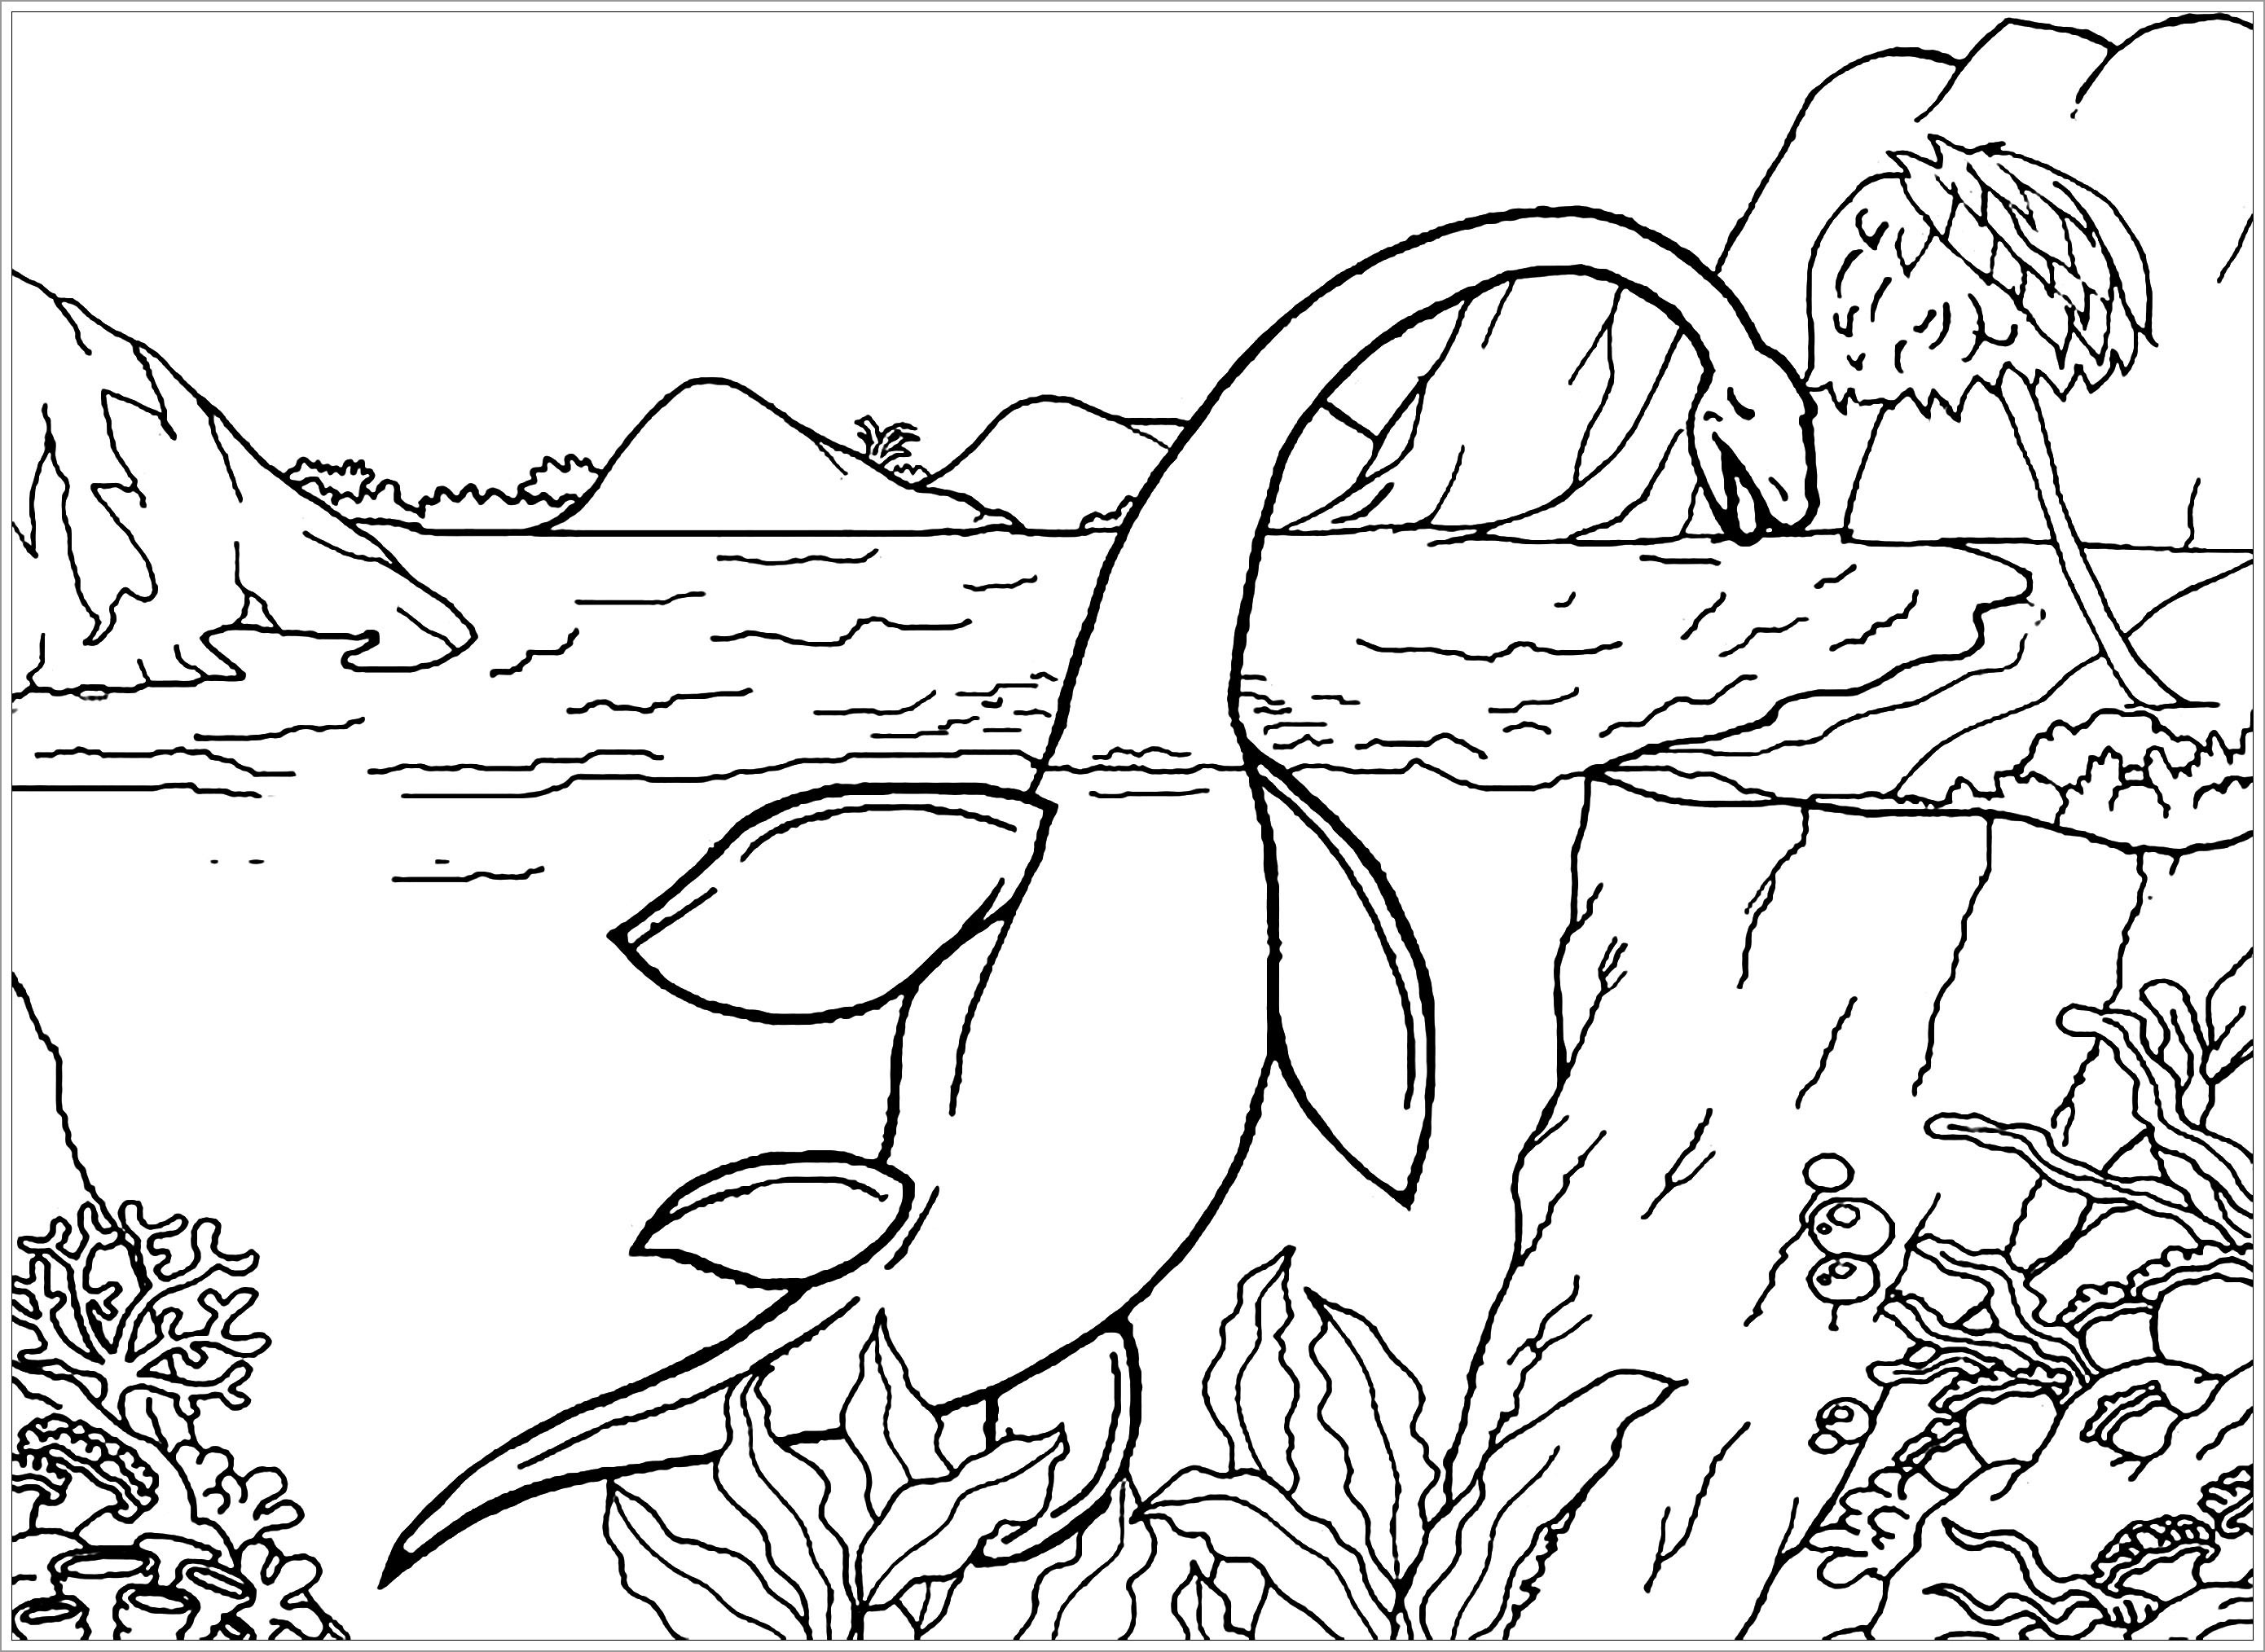 Aquatic Dinosaur Coloring Pages for Adults